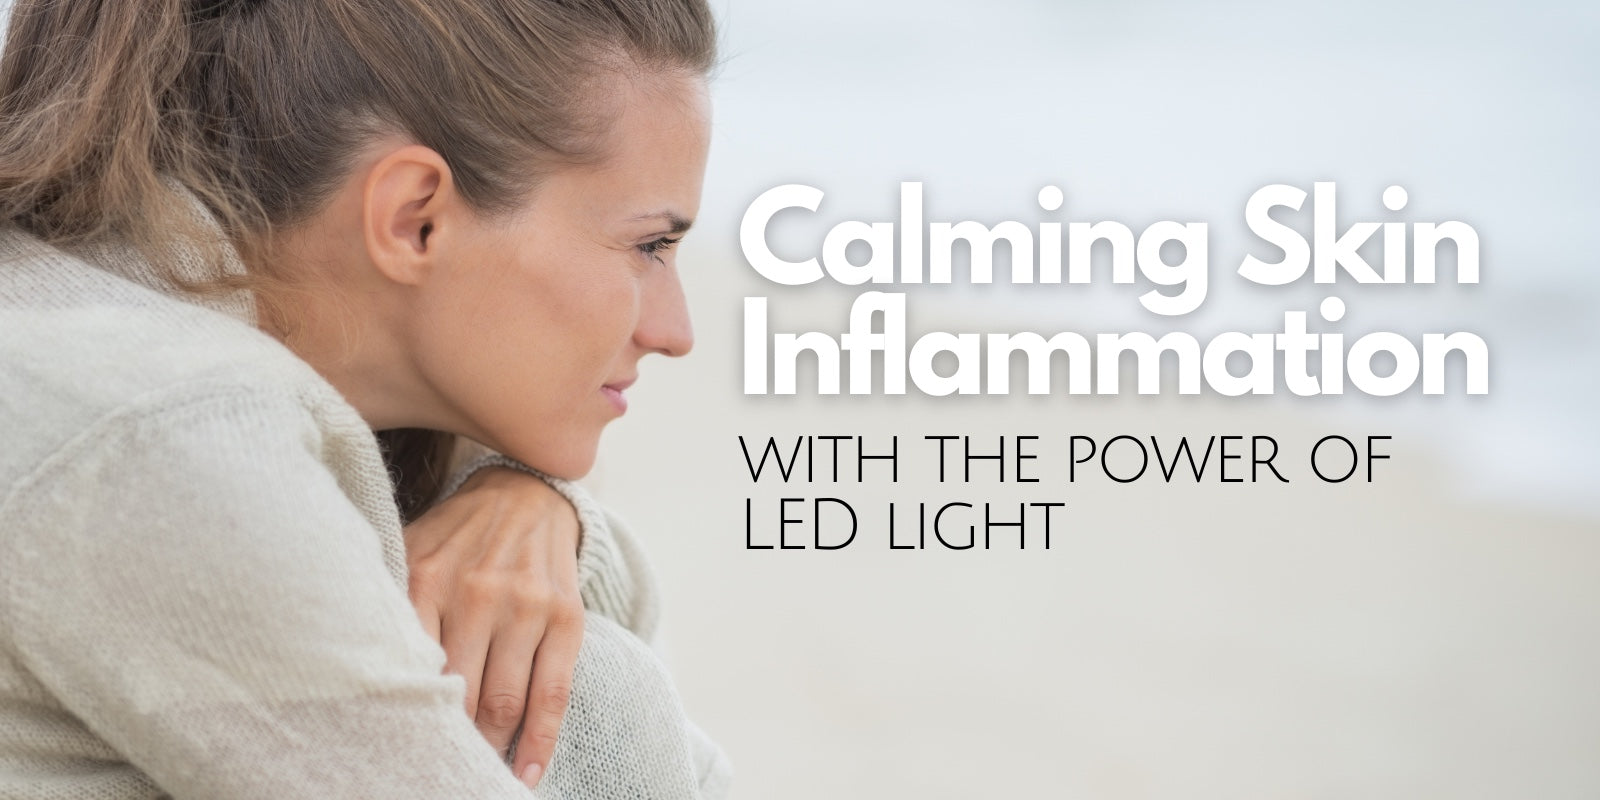 LED light for treating inflammation and premature aging in the skin